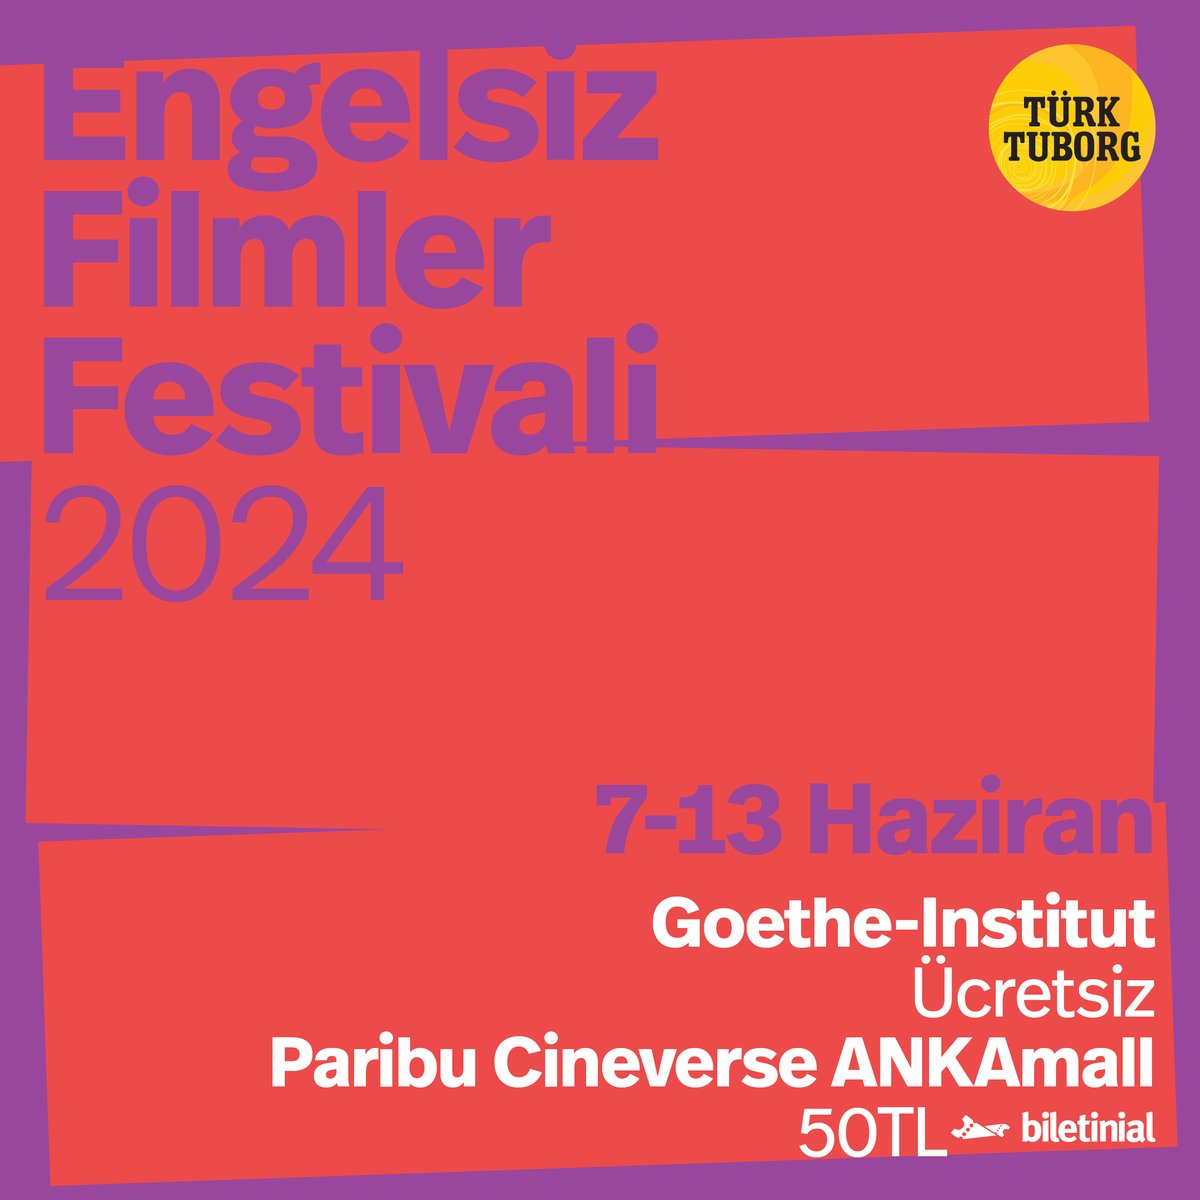 #AccessibleFilmFestival tickets are now on sale for the screenings at Paribu Cineverse ANKAmall in Ankara from June 7th to 13th! 🎫📽️

The Festival, featuring 41 films, will take place in Ankara at Paribu Cineverse ANKAmall and Goethe-Institut.